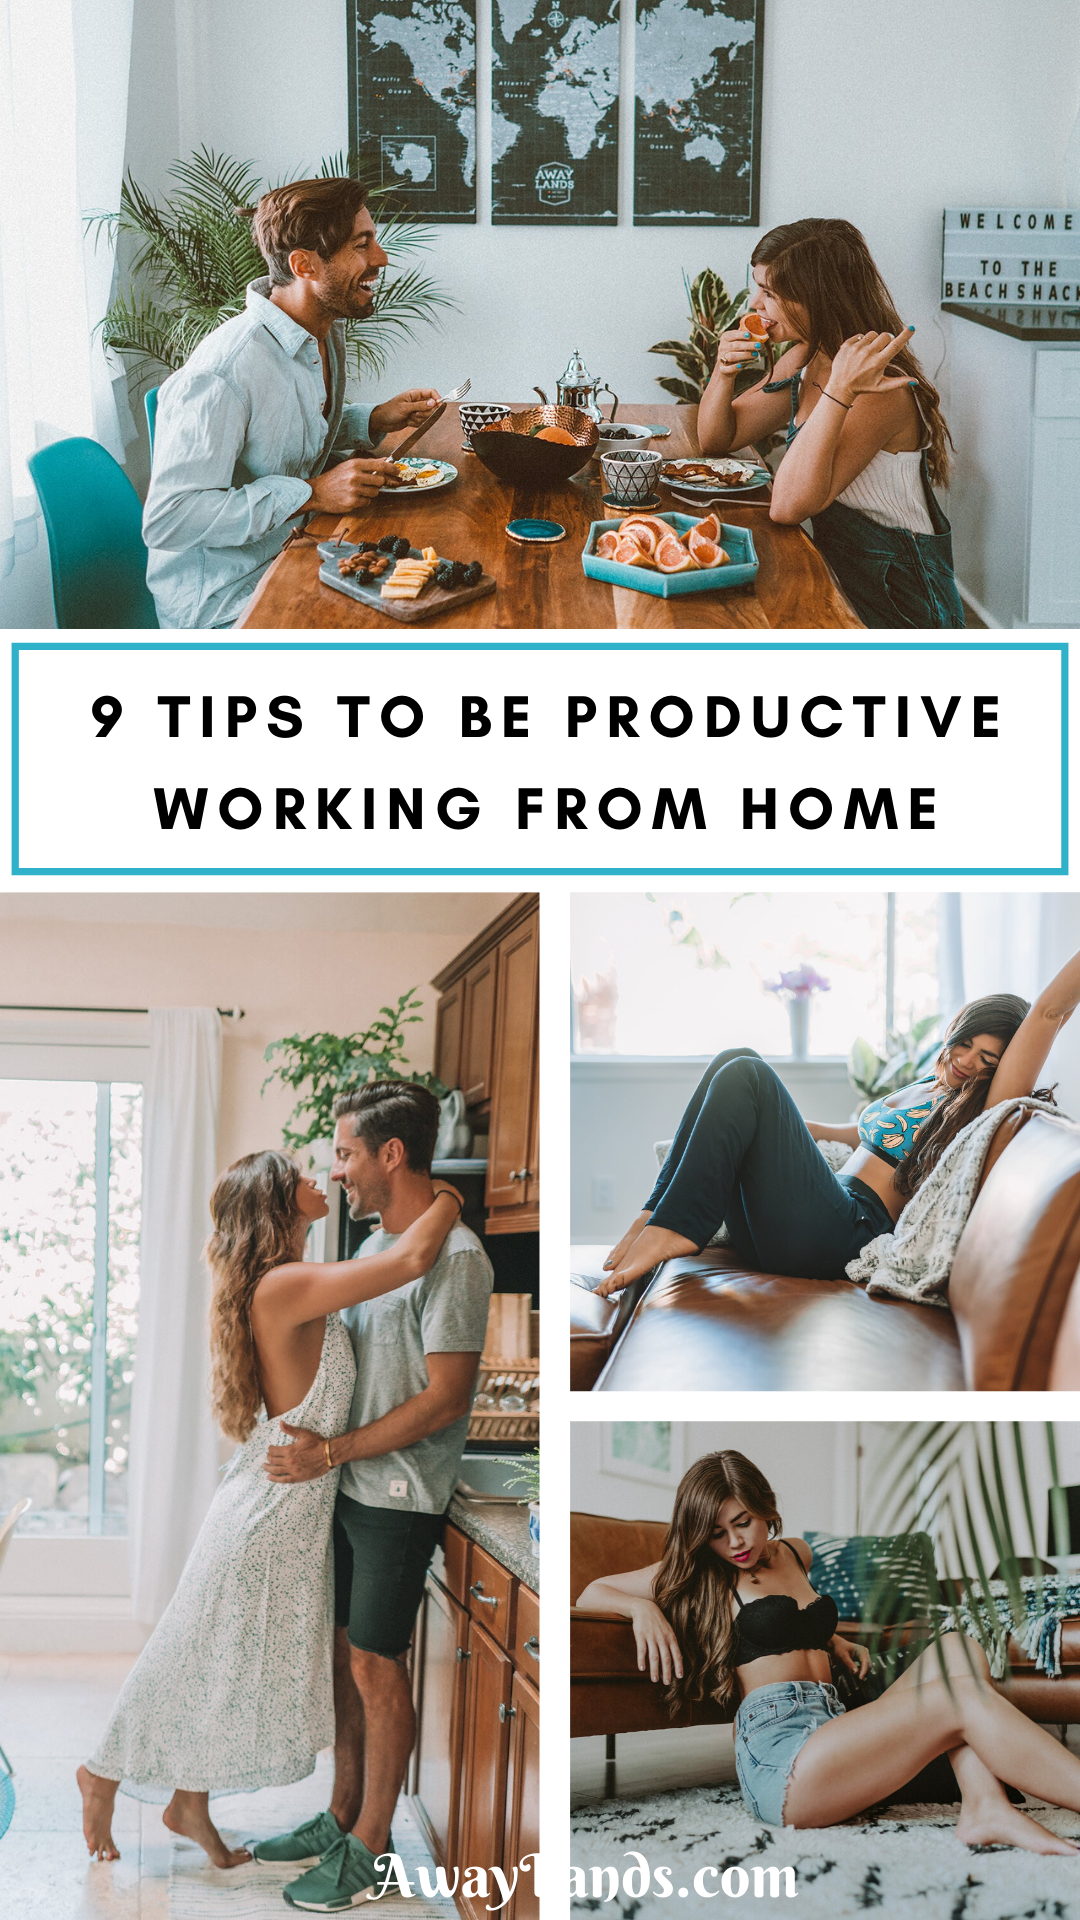 Struggling with working from home? Check out our list of 9 tips for how to be productive working from home from a couple who has worked at home together for years. #workfromhome #productivity | productivity hacks | productivity tips | productive day routine | working from home tips | working from home couple | working at home | how to be productive working from home | working from home productivity | being productive working from home | work from home tips | work from home productivity tips | 